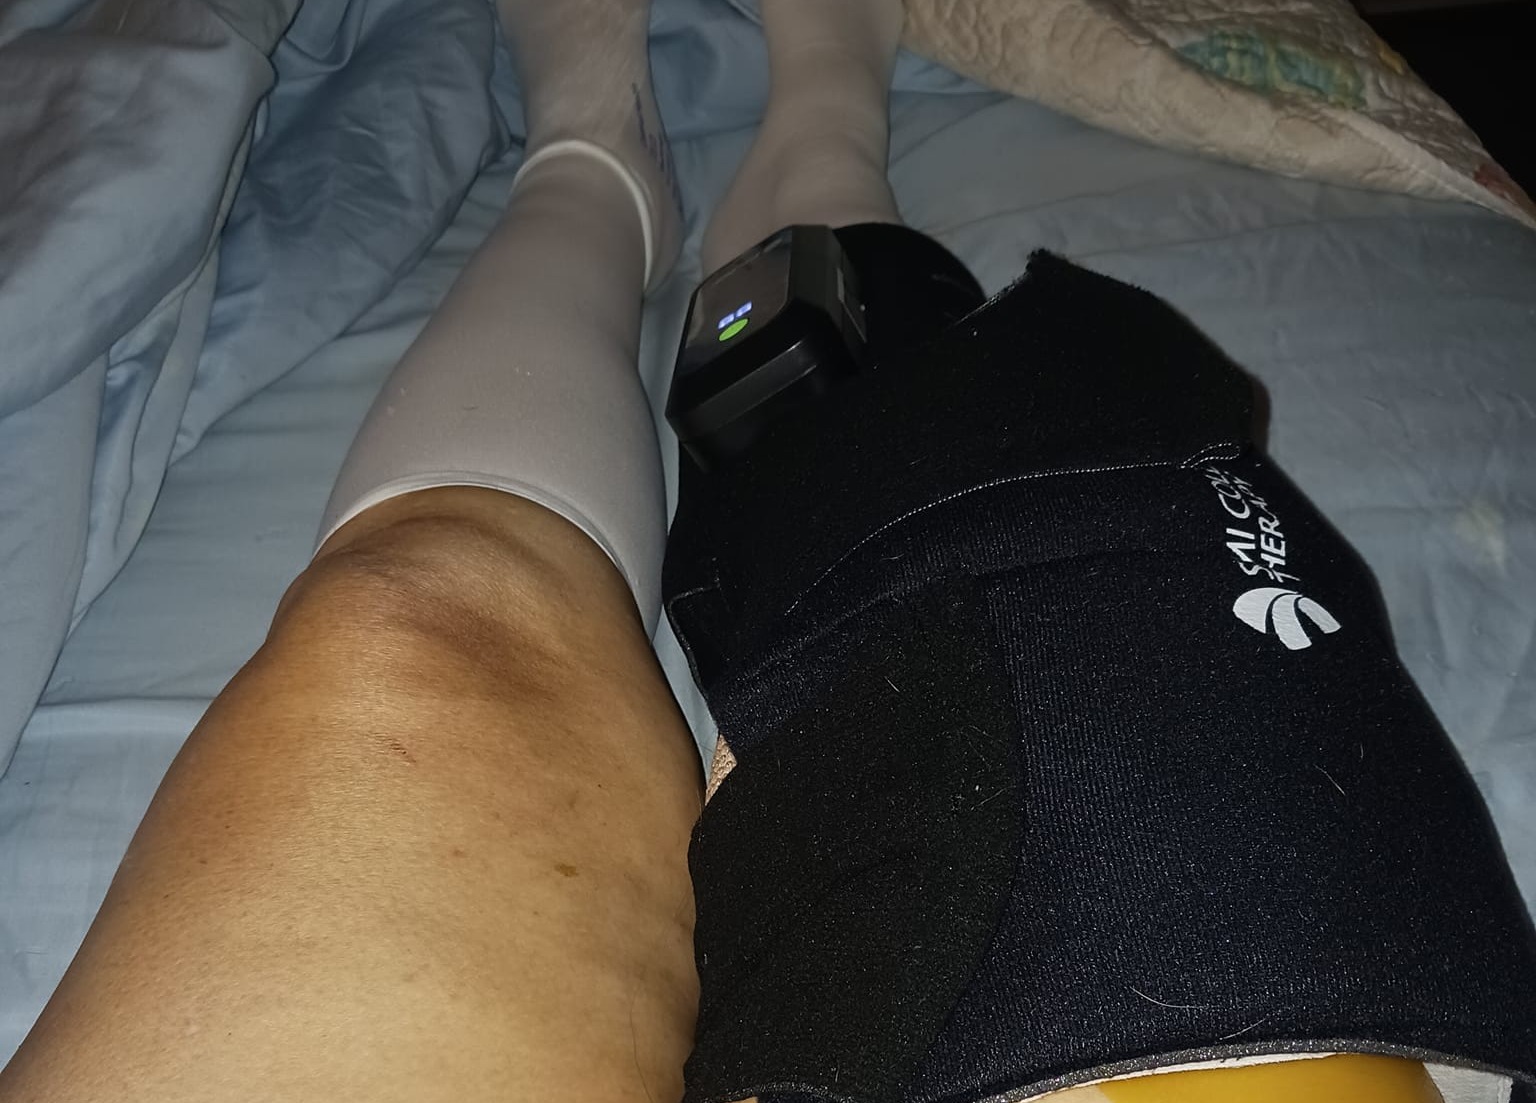 Ice Pack on Knee After Knee Replacement Surgery